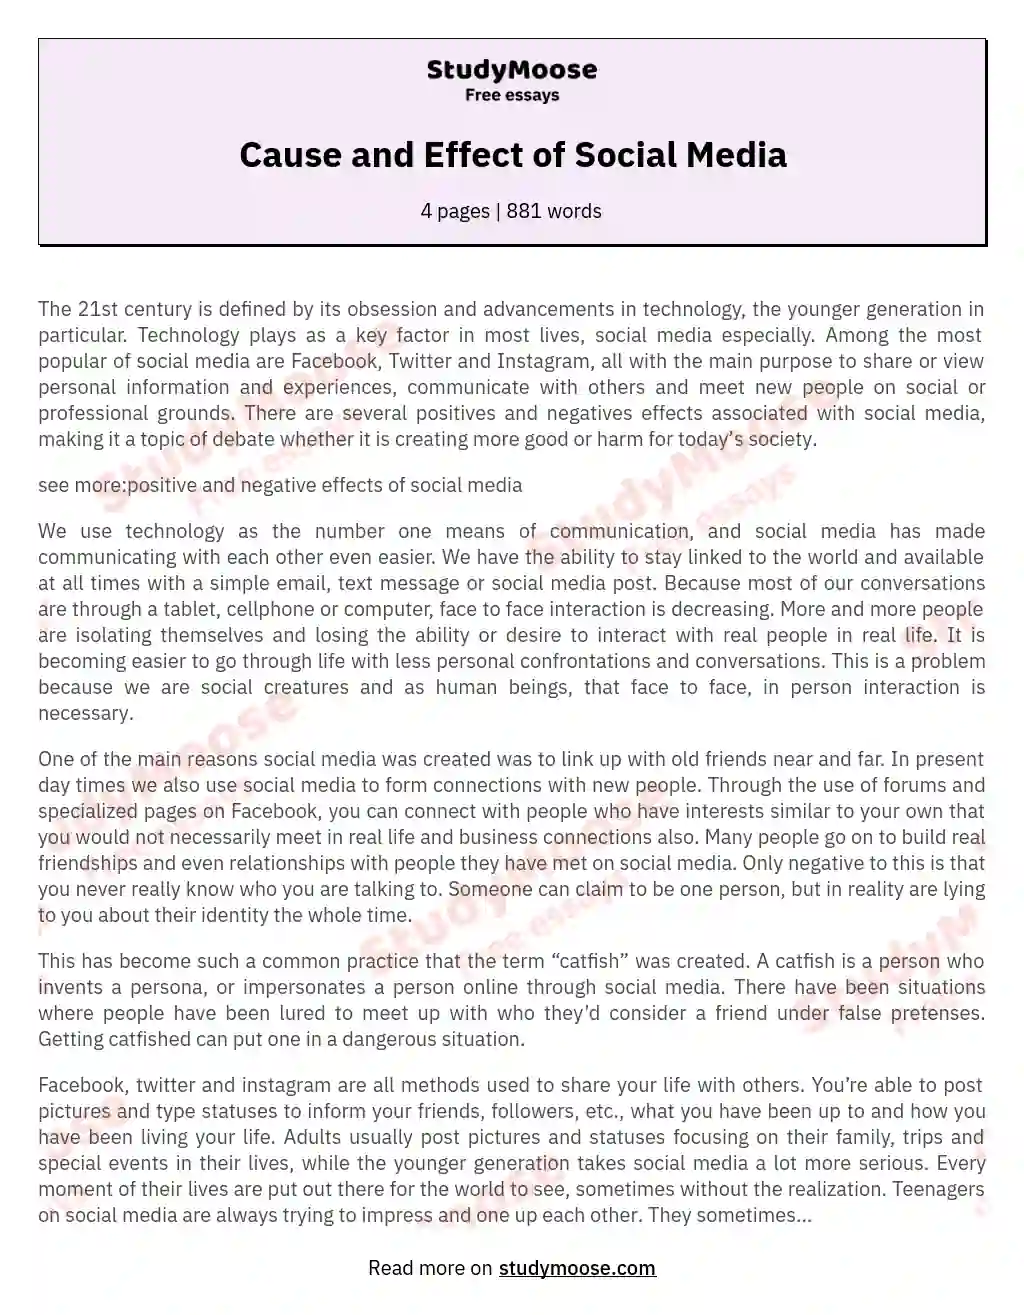 Cause and Effect of Social Media essay